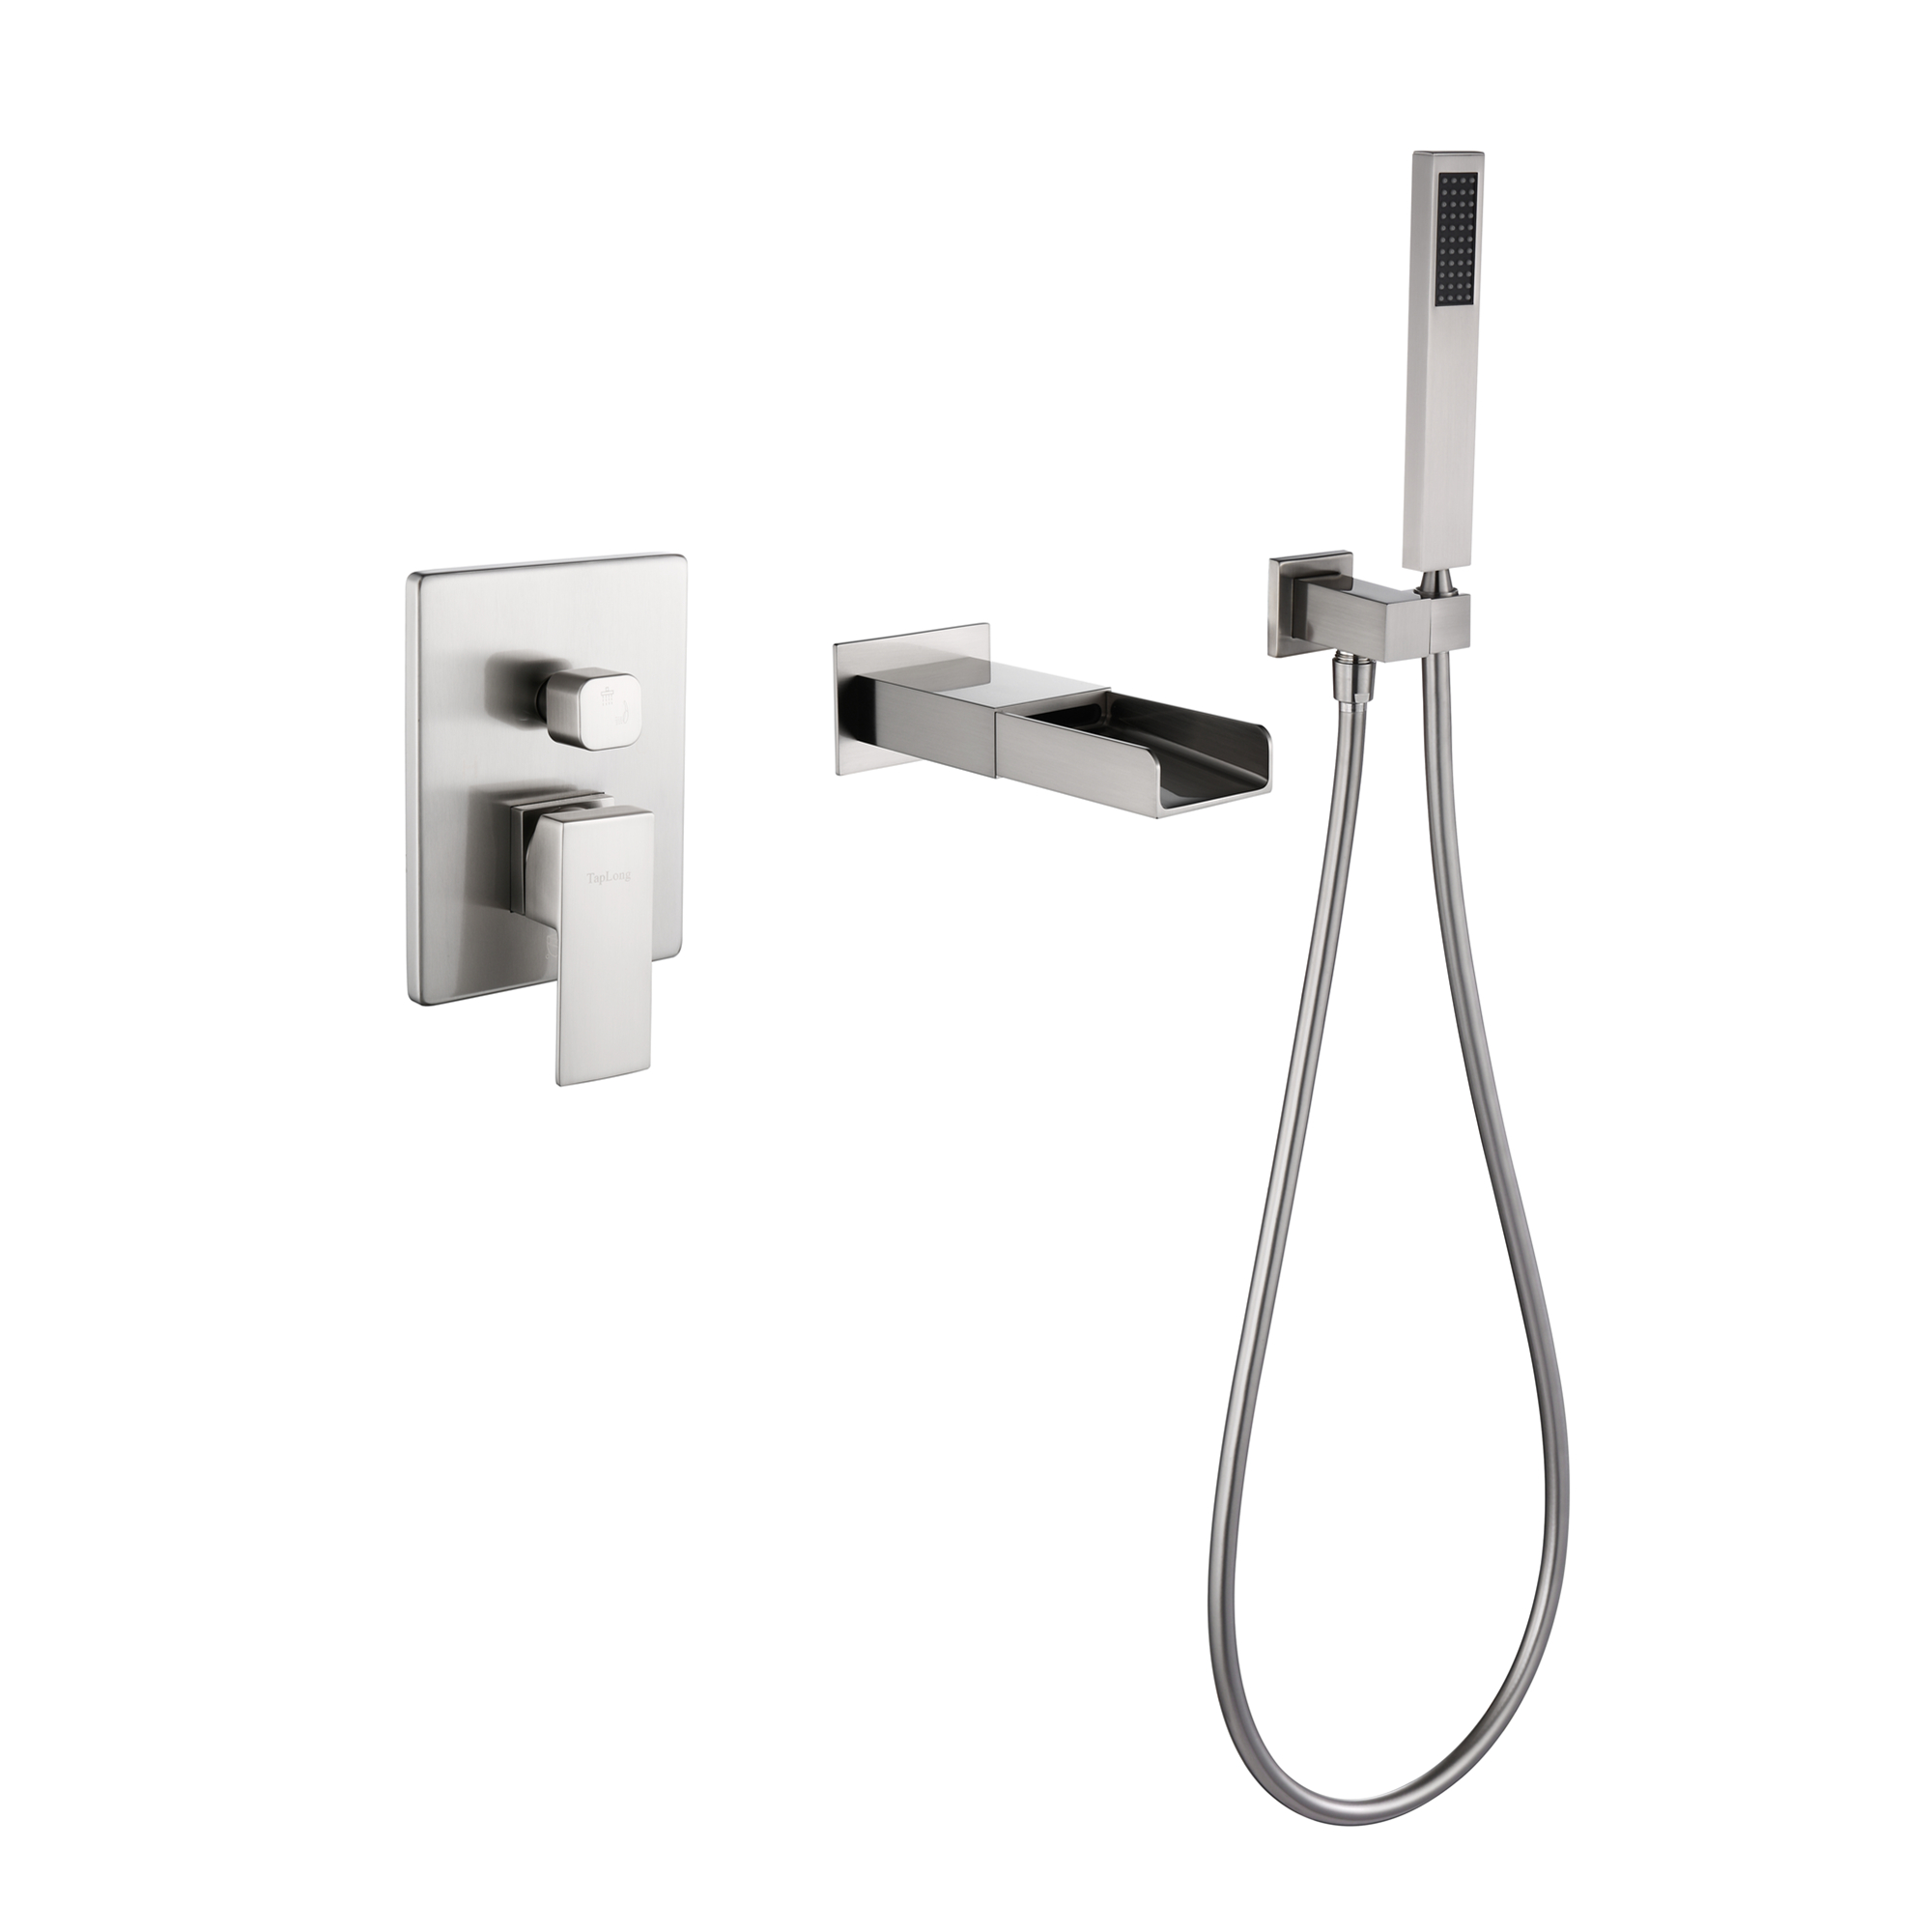 TrustMade Pressure-Balance Waterfall Single Handle Wall Mount Tub Faucet with Hand Shower, Brushed Nickel - 2W01-CASAINC